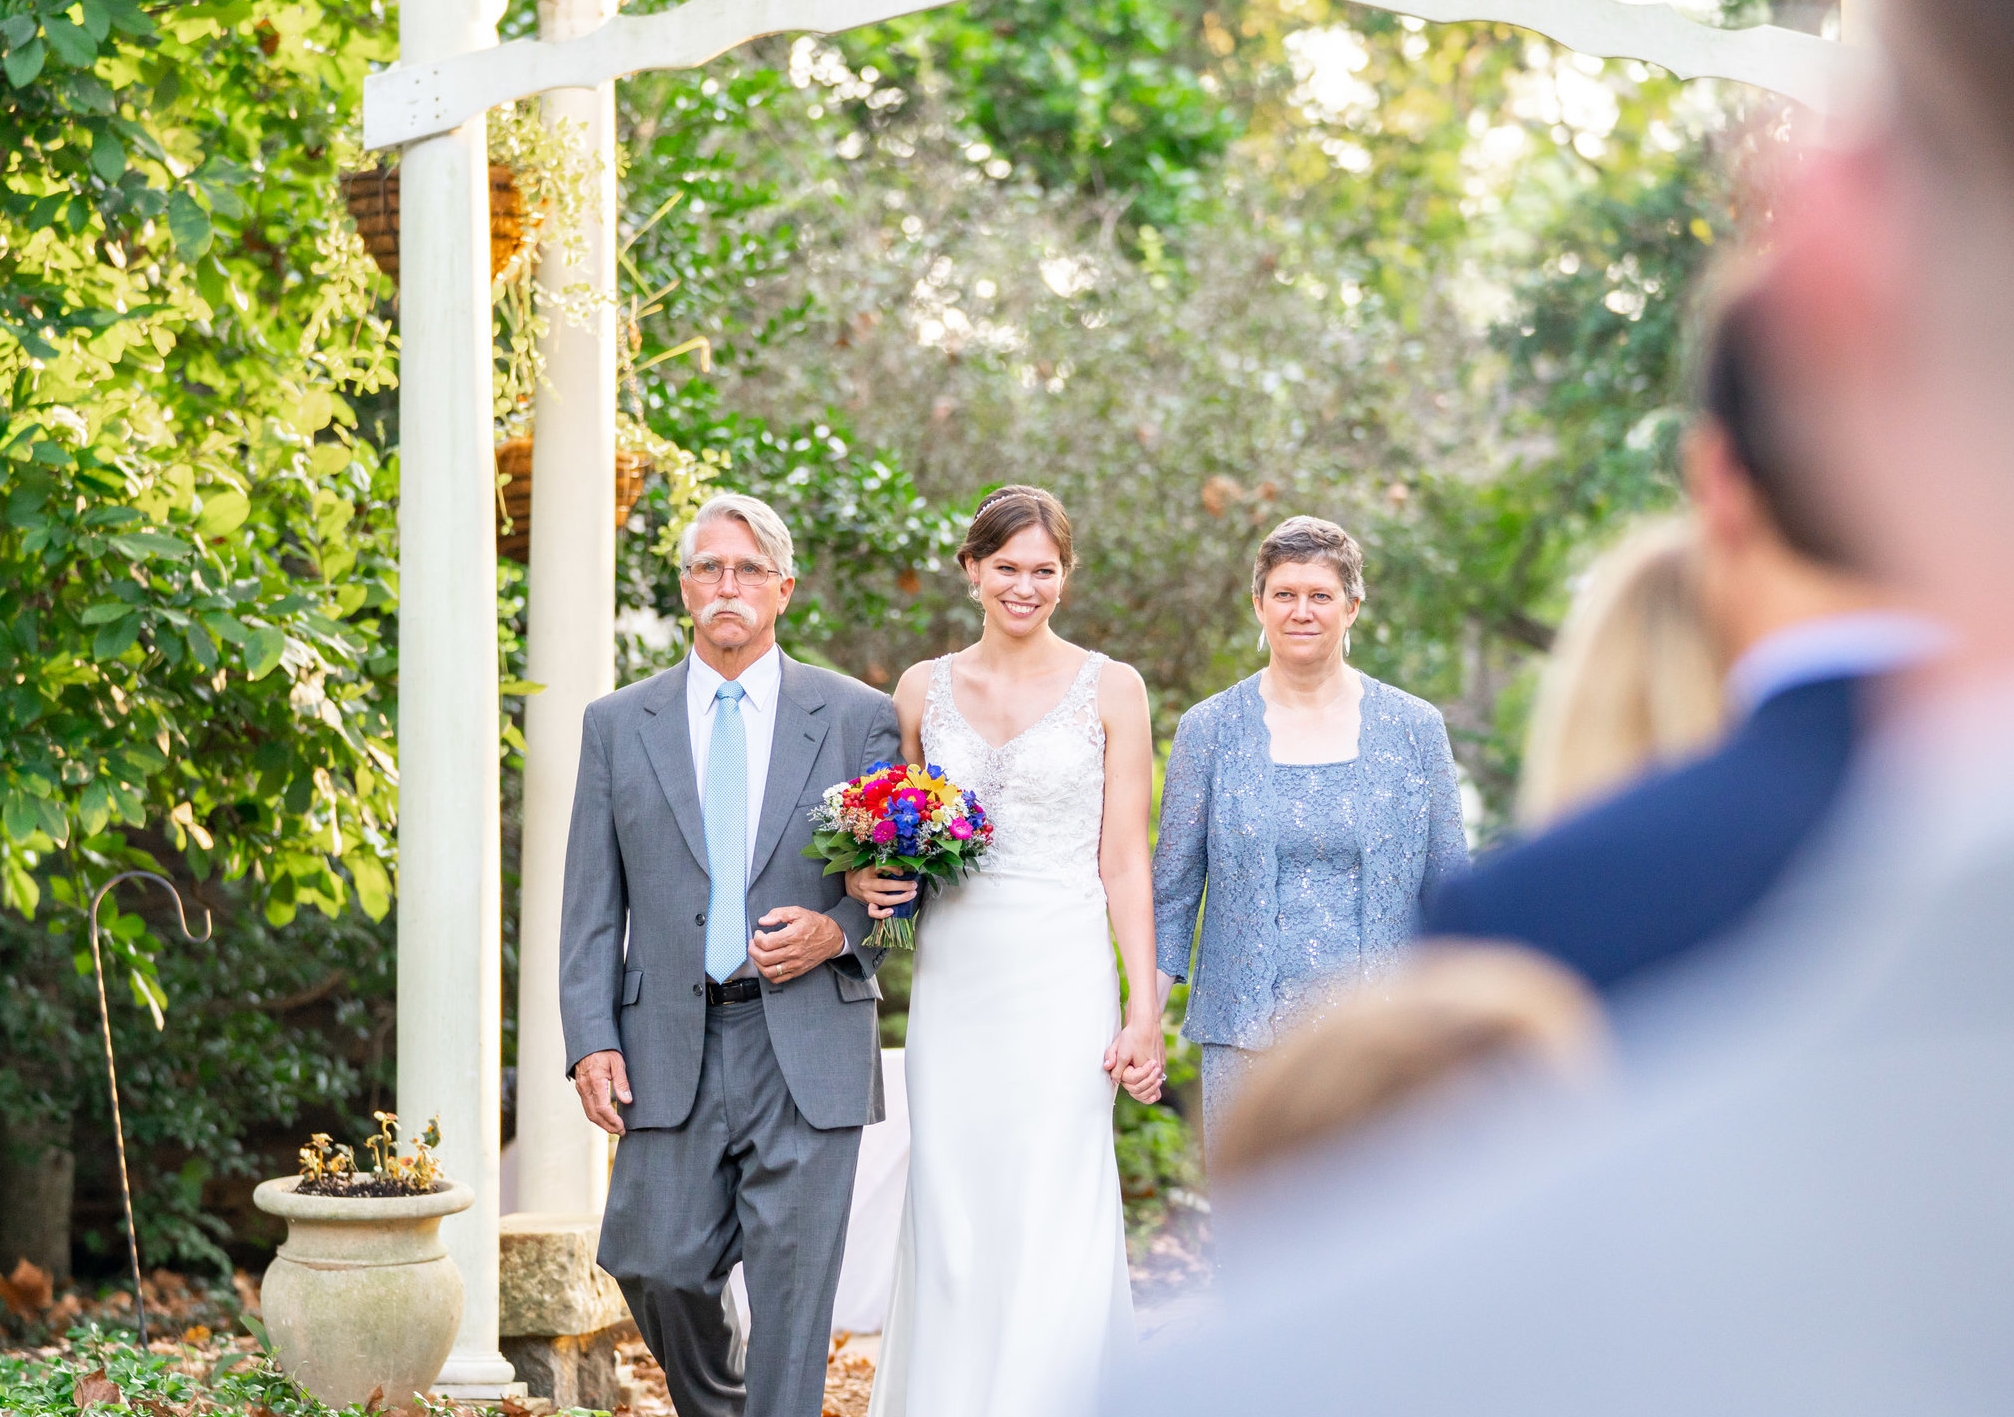 Parents walking the bride down the aisle at outdoor ceremony at Elkridge Furnace Inn